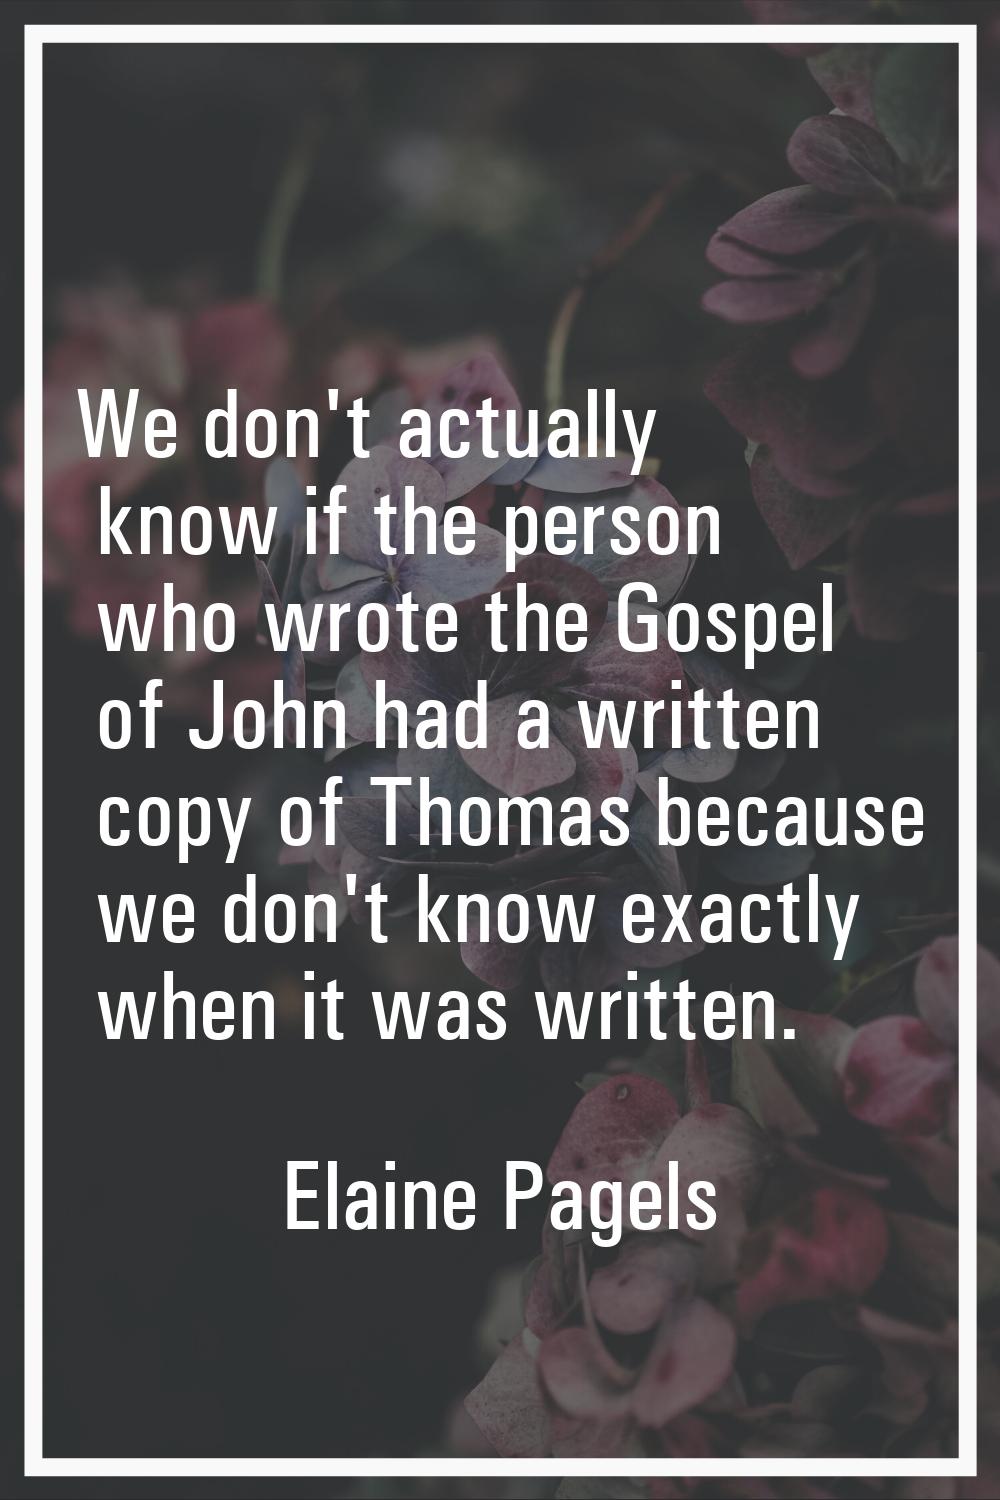 We don't actually know if the person who wrote the Gospel of John had a written copy of Thomas beca